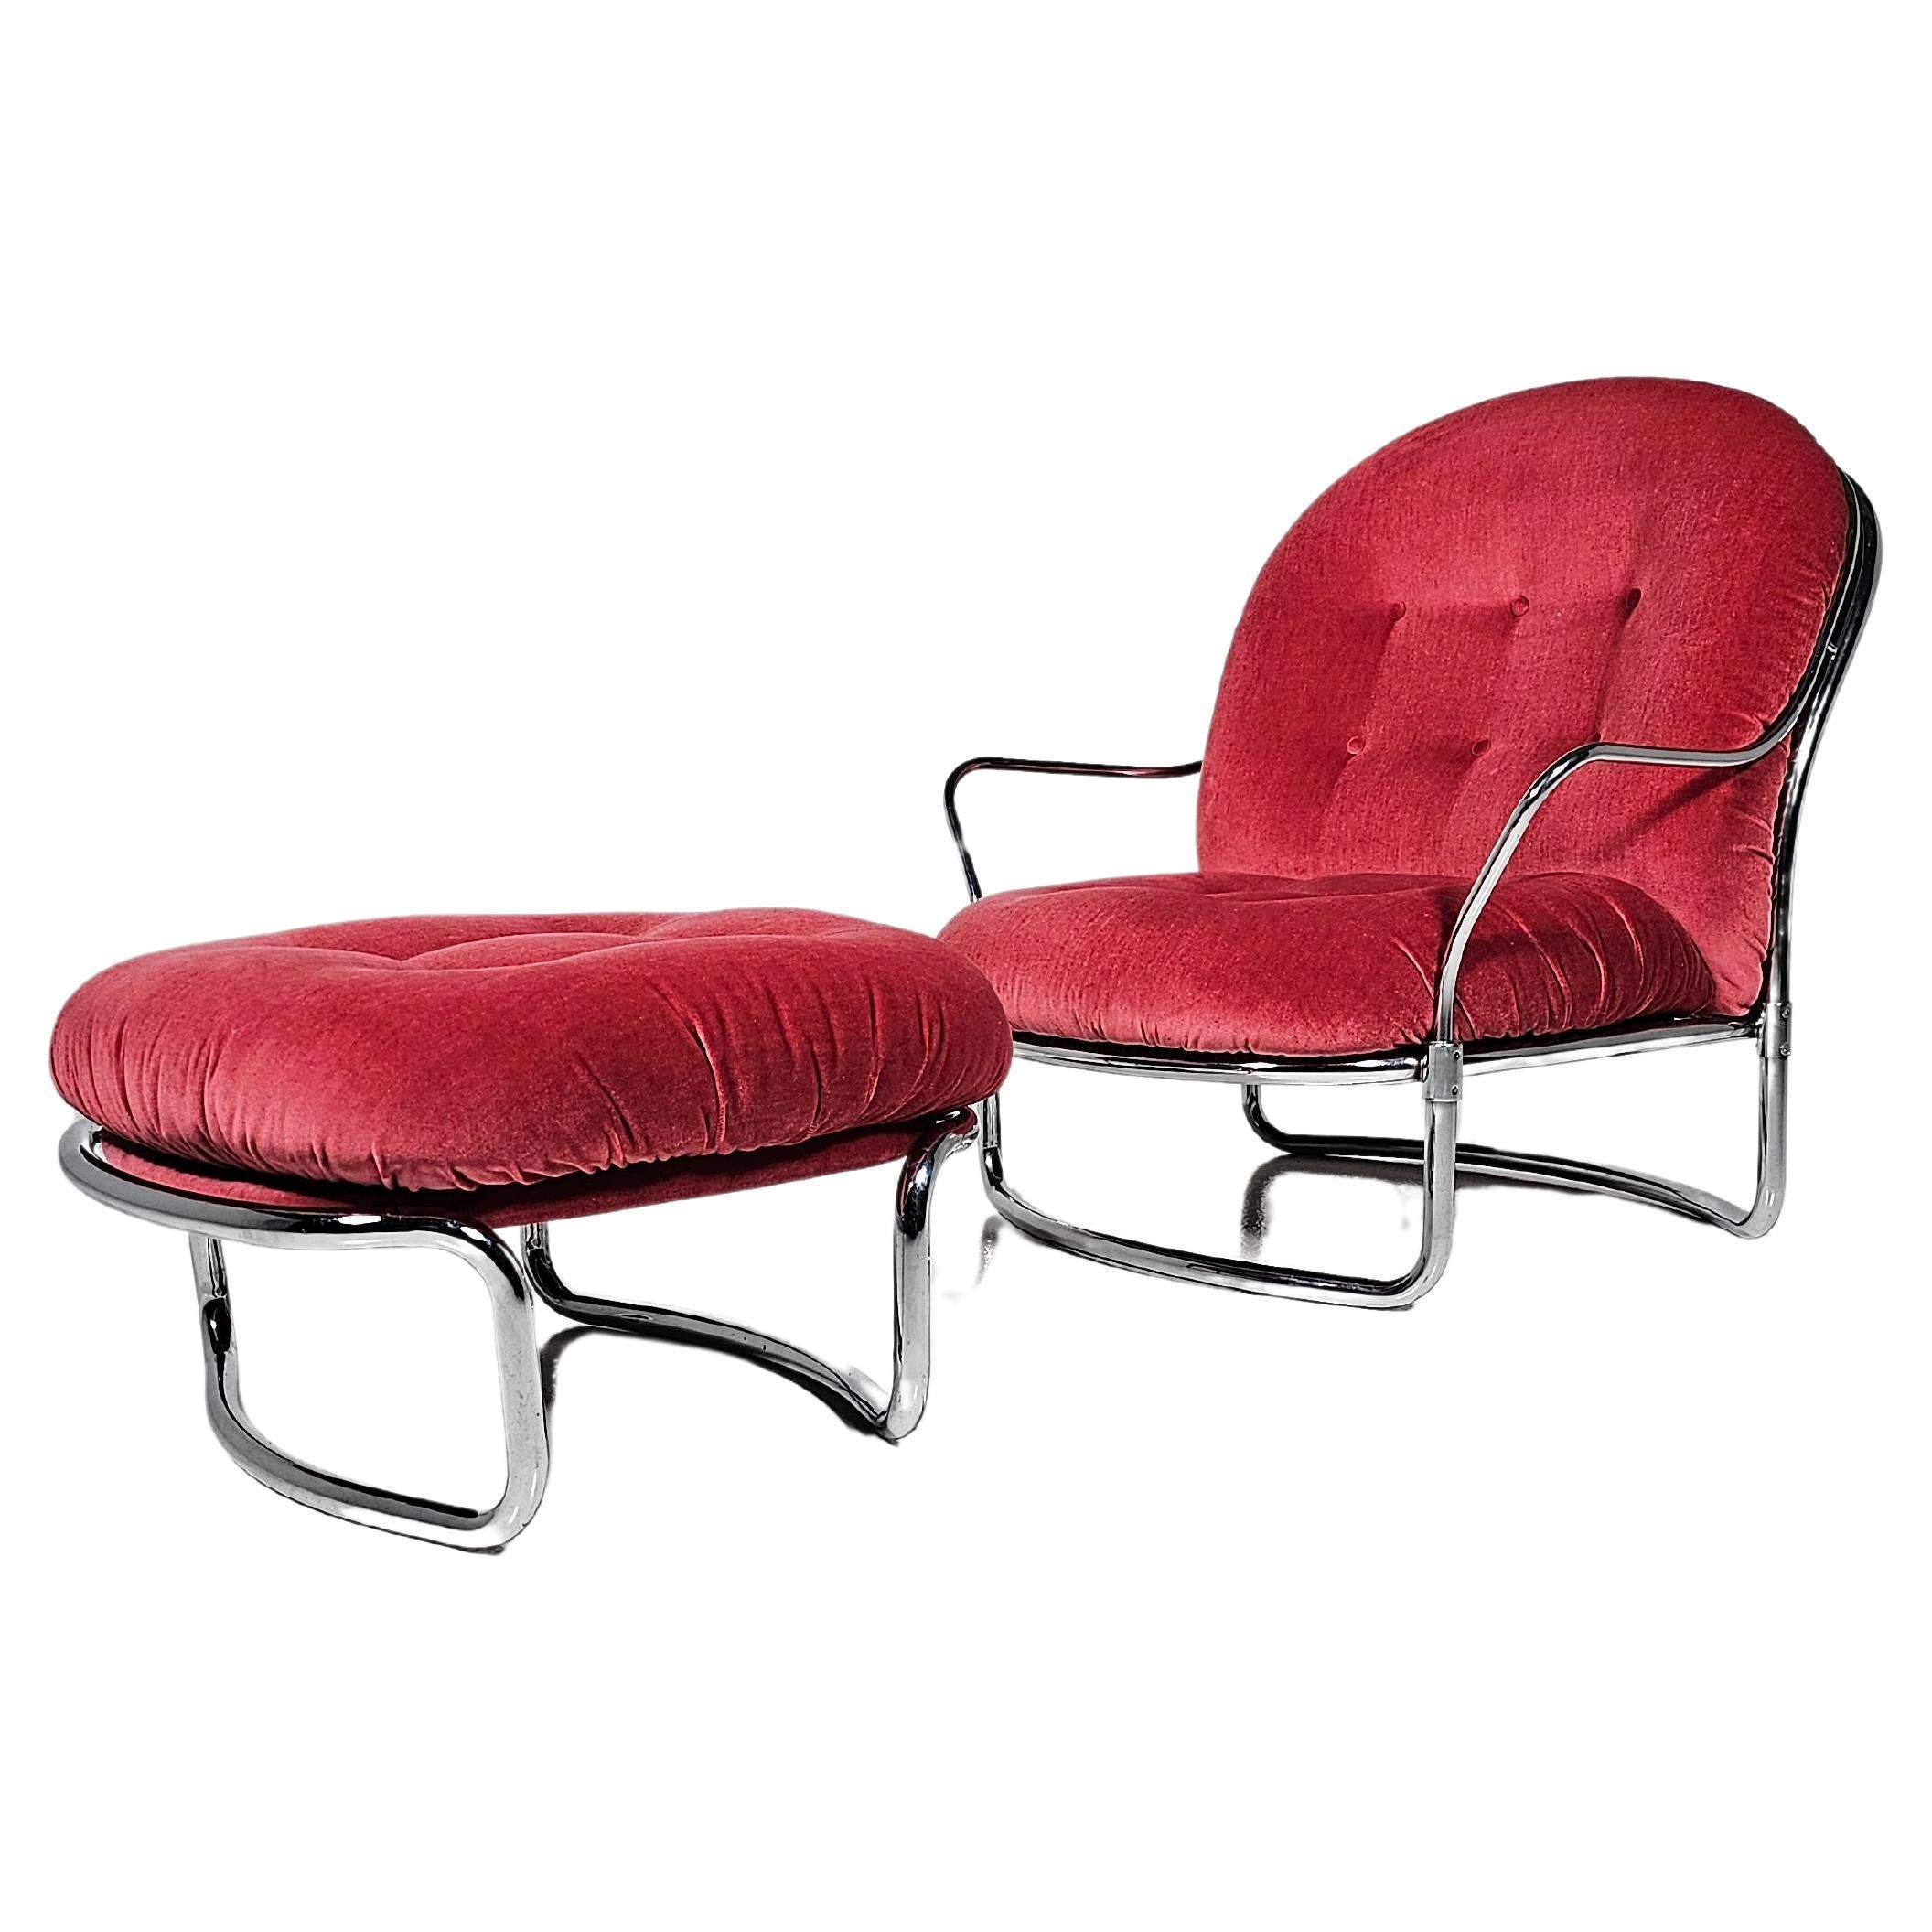 Carlo De Carli for Cinova, lounge chair model '915' with ottoman, metal, chrome, fabric, Italy, 1969.

Tubular armchair with ottoman designed by Carlo De Carli in 1969, manufactured by Cinova, Italy. With a curved, chromed frame that holds the